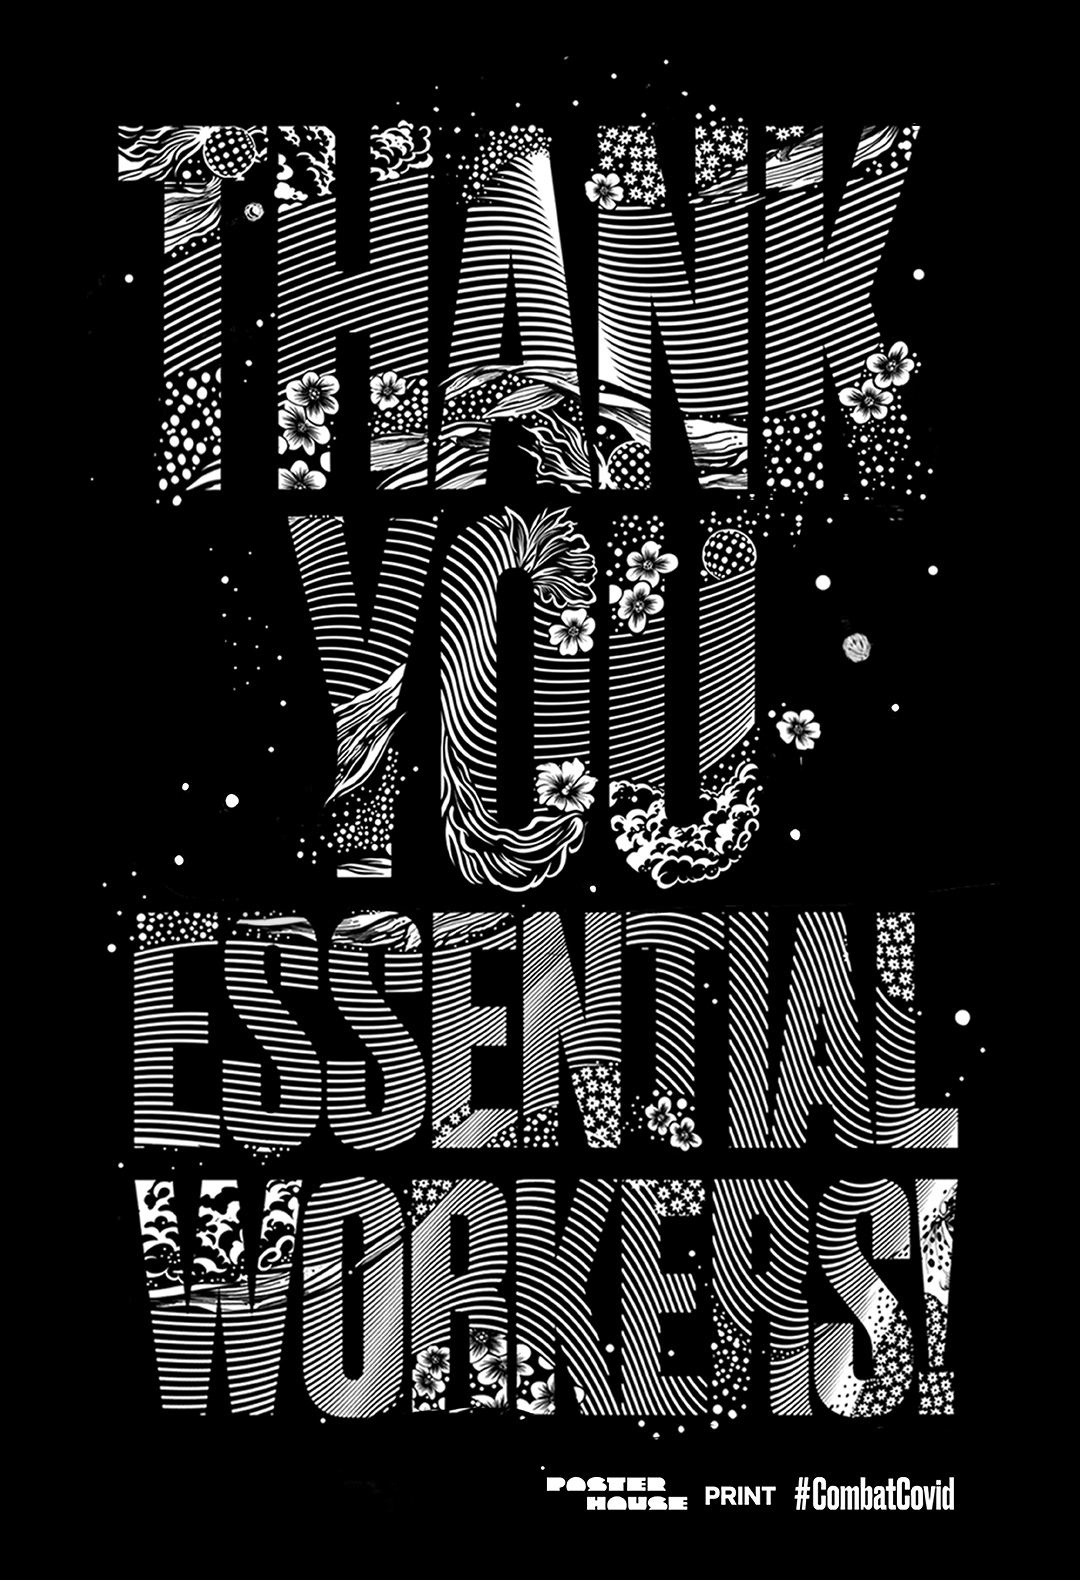 A decorative type poster thanking essential workers.